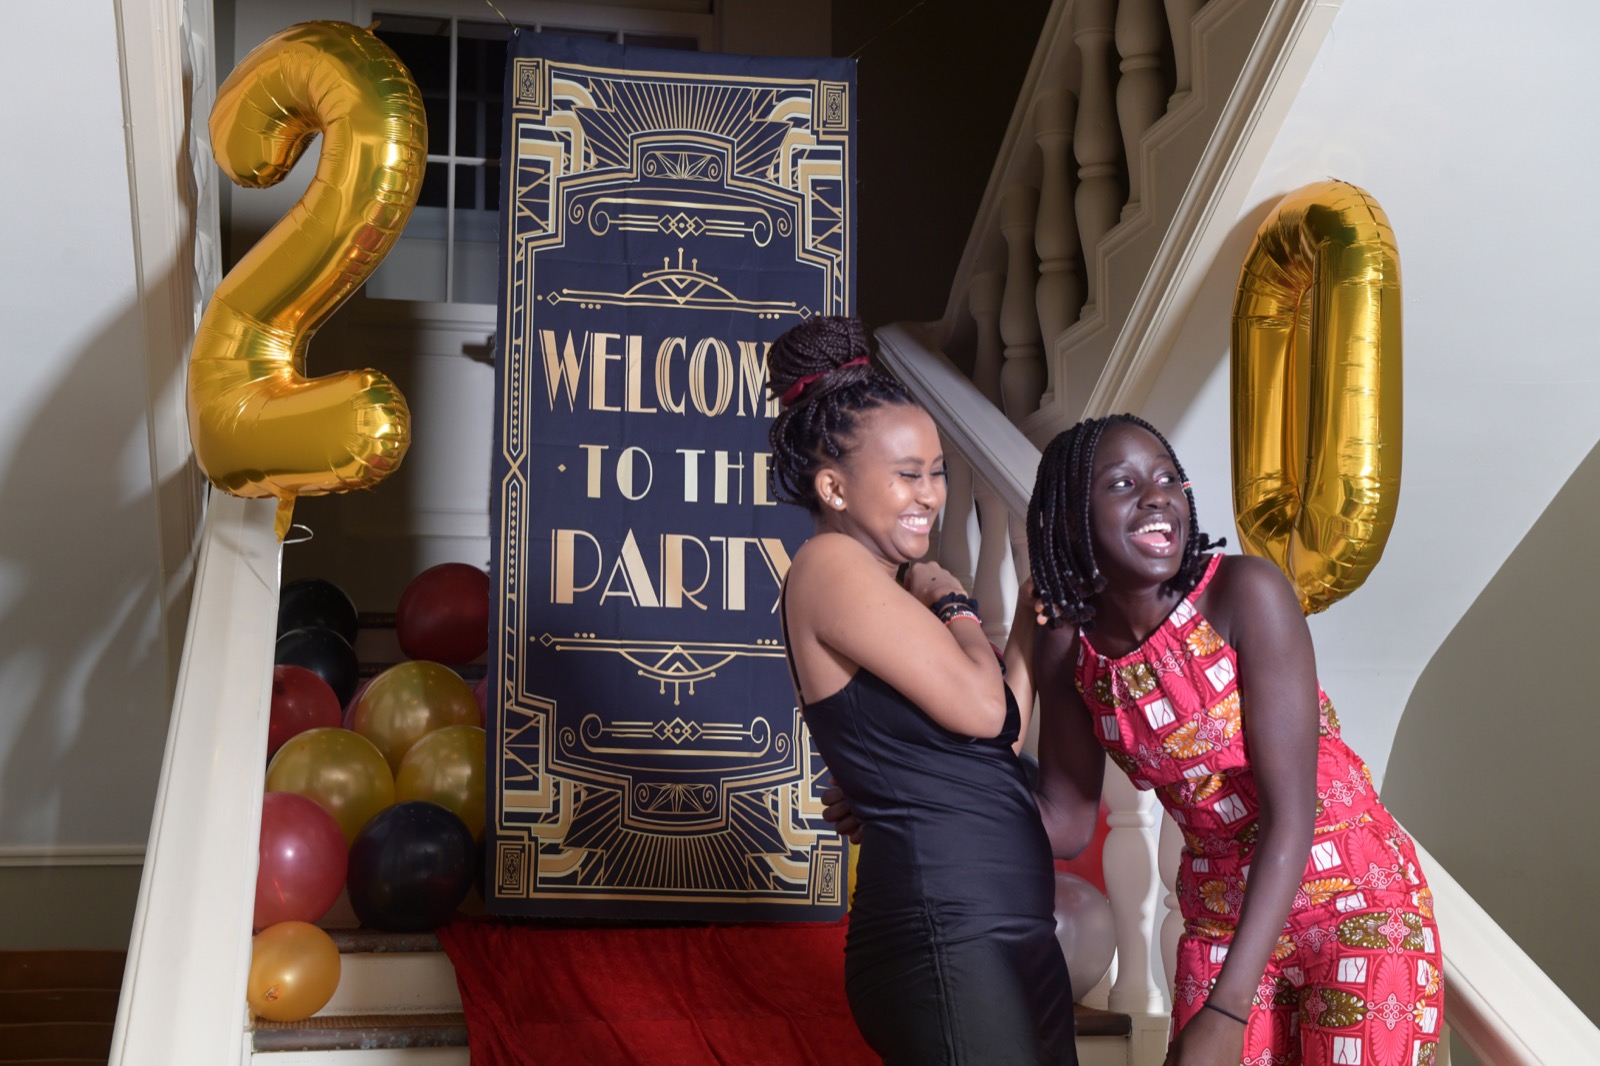 Bowdoin students joined with Bates and Colby to celebrate the Ebony Ball.